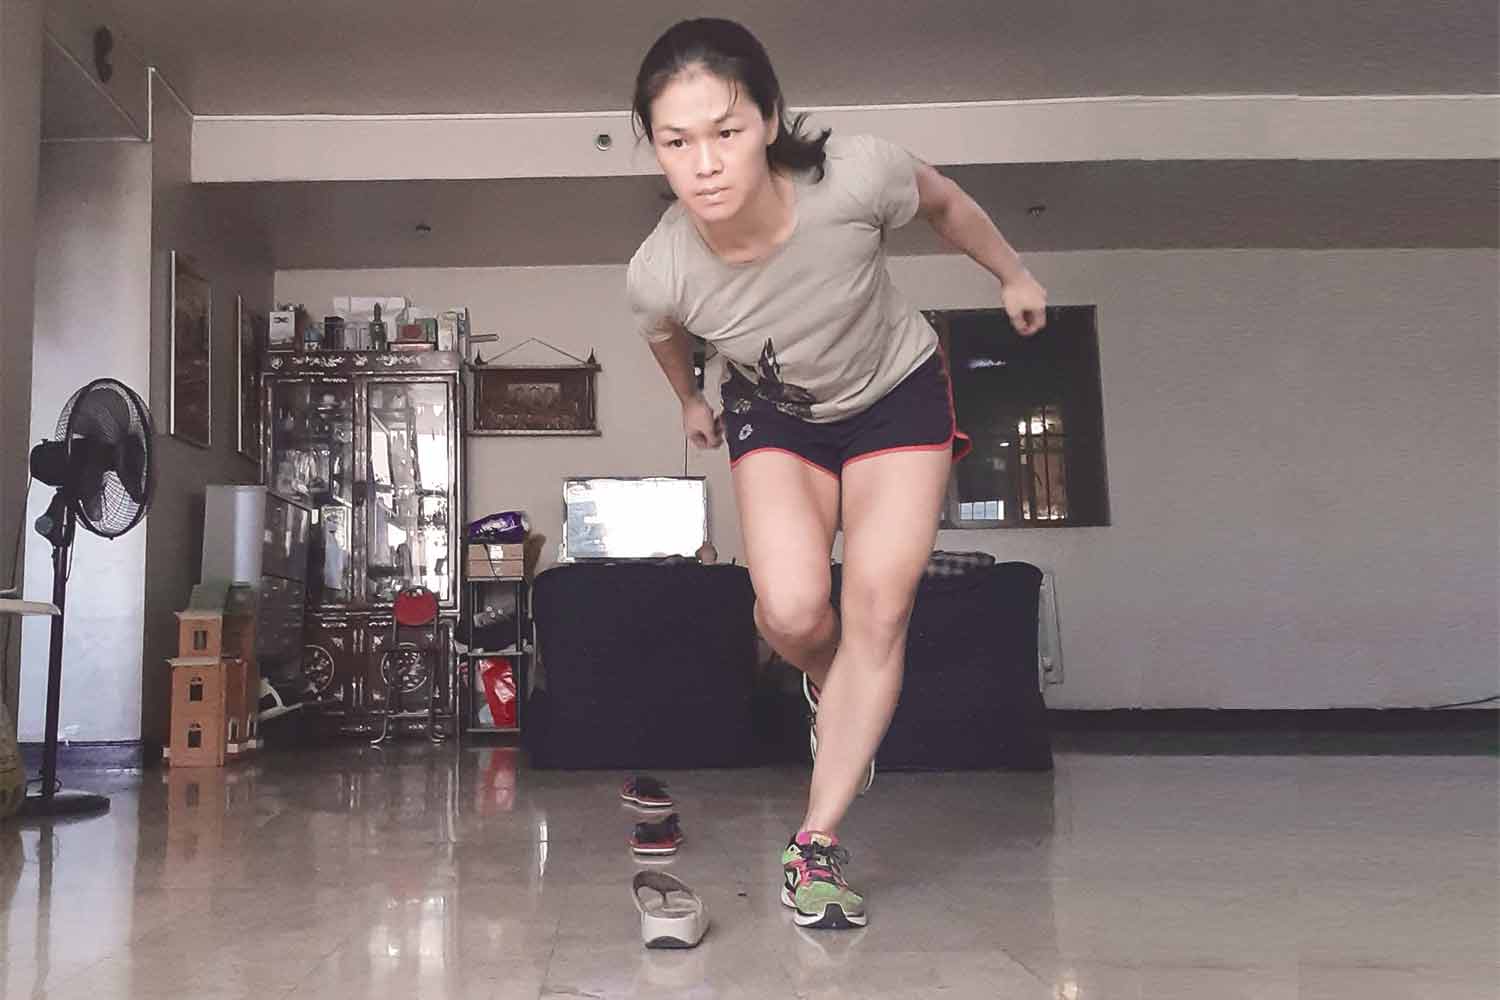 Woman doing exercises at home with shoes as obstacles